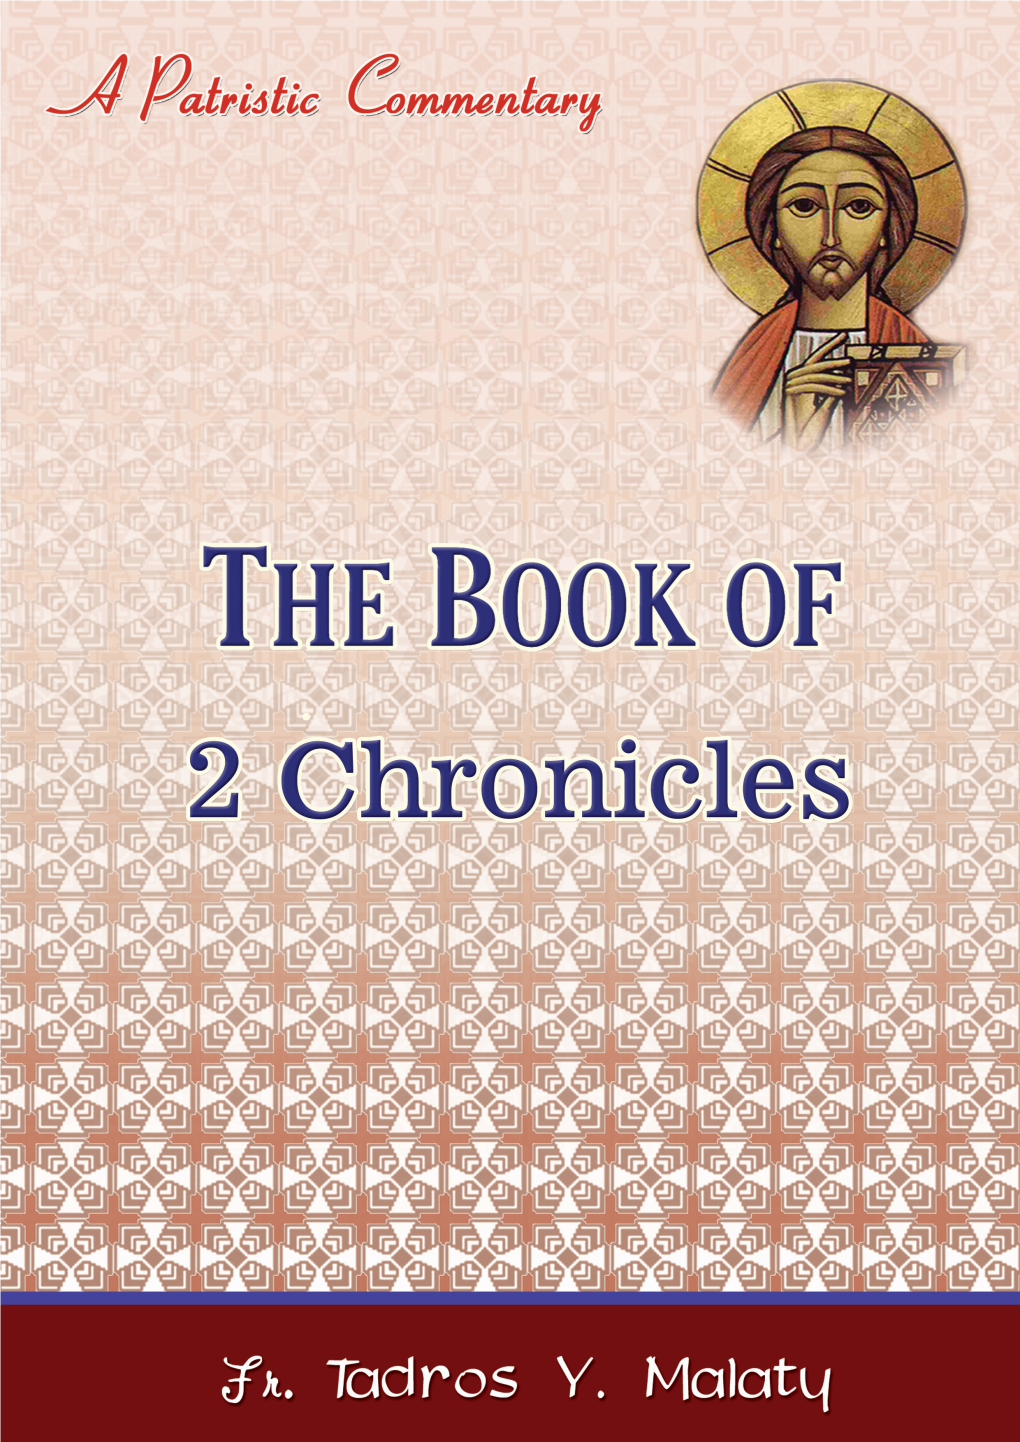 14 Commentary on the Book of 2 Chronicles